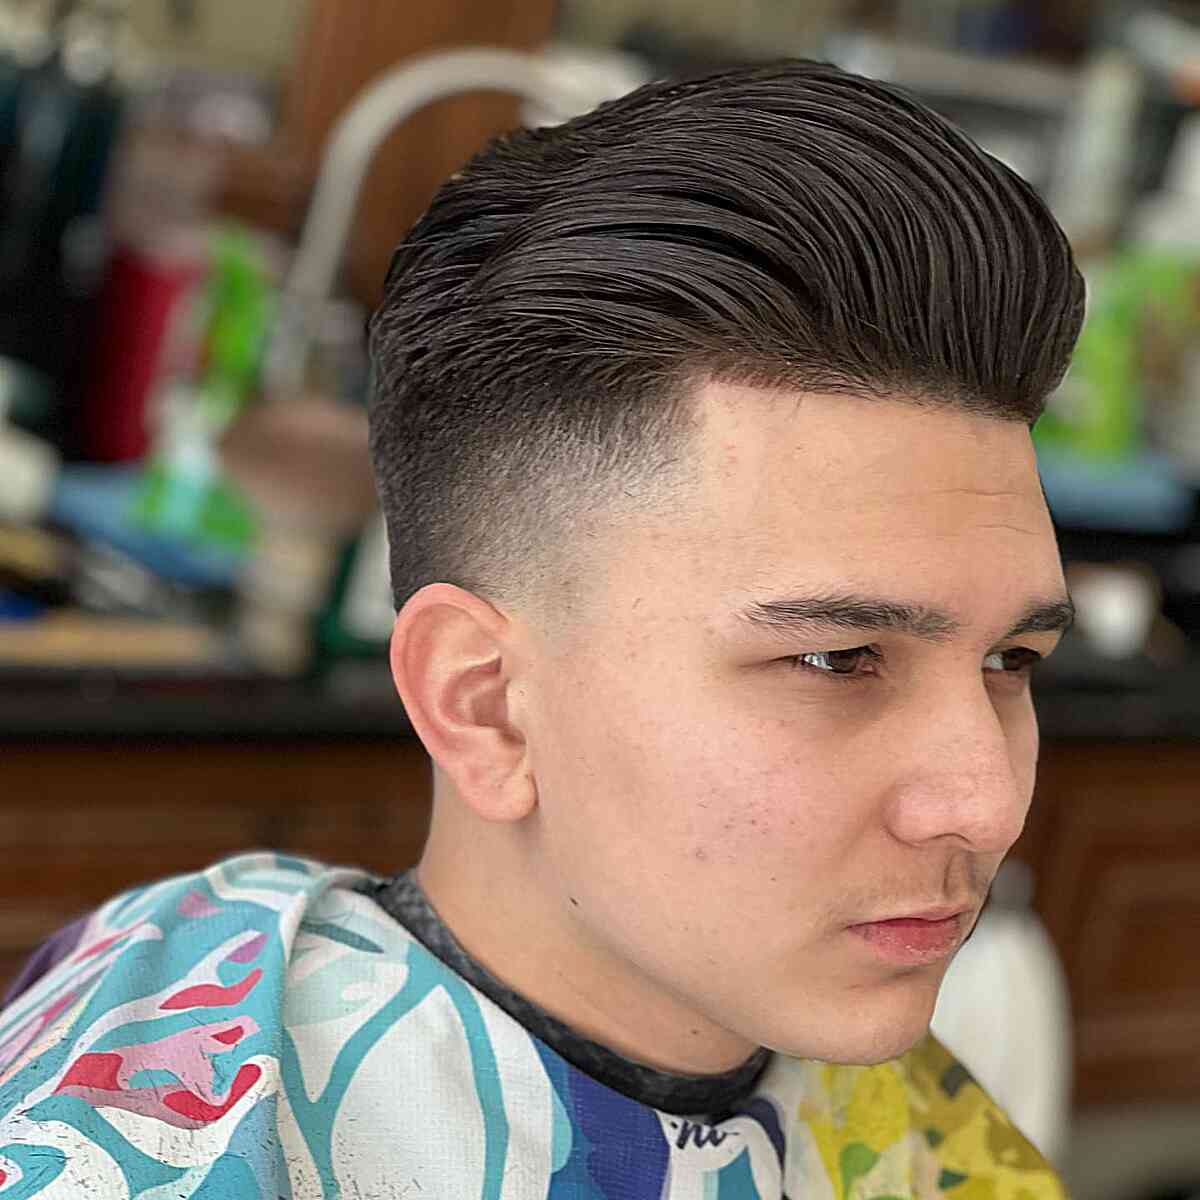 25 Modern Bald Fades to Show Your Barber